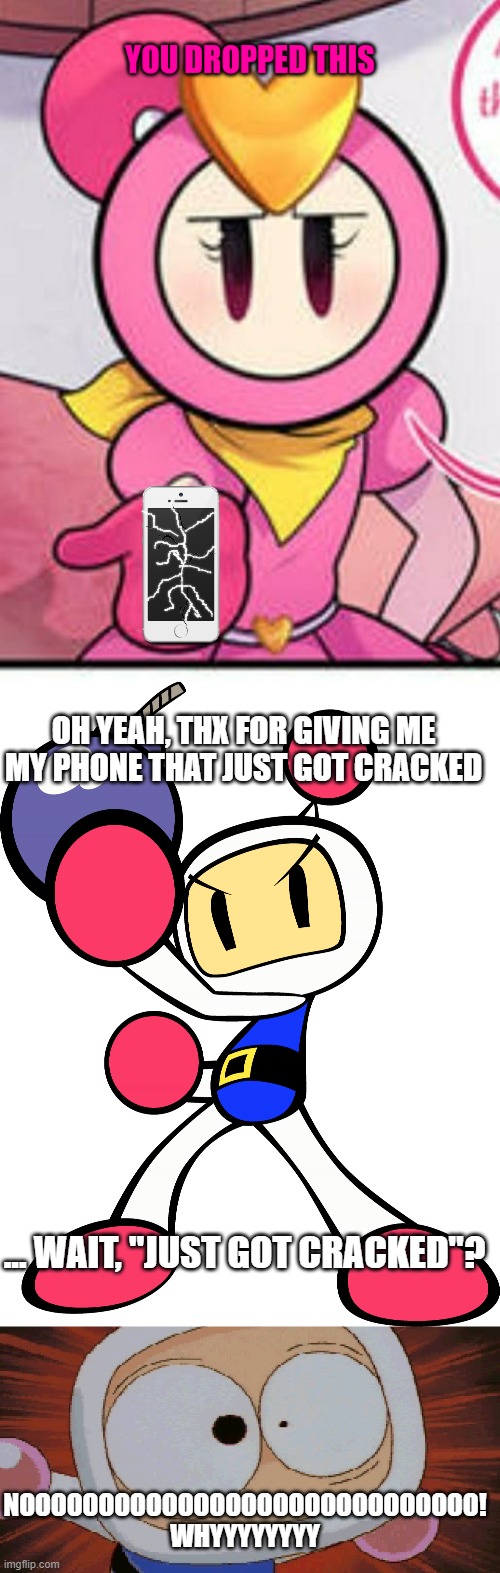 White Bomber dropped his phone and it broke | OH YEAH, THX FOR GIVING ME MY PHONE THAT JUST GOT CRACKED; ... WAIT, "JUST GOT CRACKED"? NOOOOOOOOOOOOOOOOOOOOOOOOOOOOO! WHYYYYYYYY | image tagged in you dropped this pretty bomber,white bomber super bomberman r,white bomber scared,bomberman | made w/ Imgflip meme maker